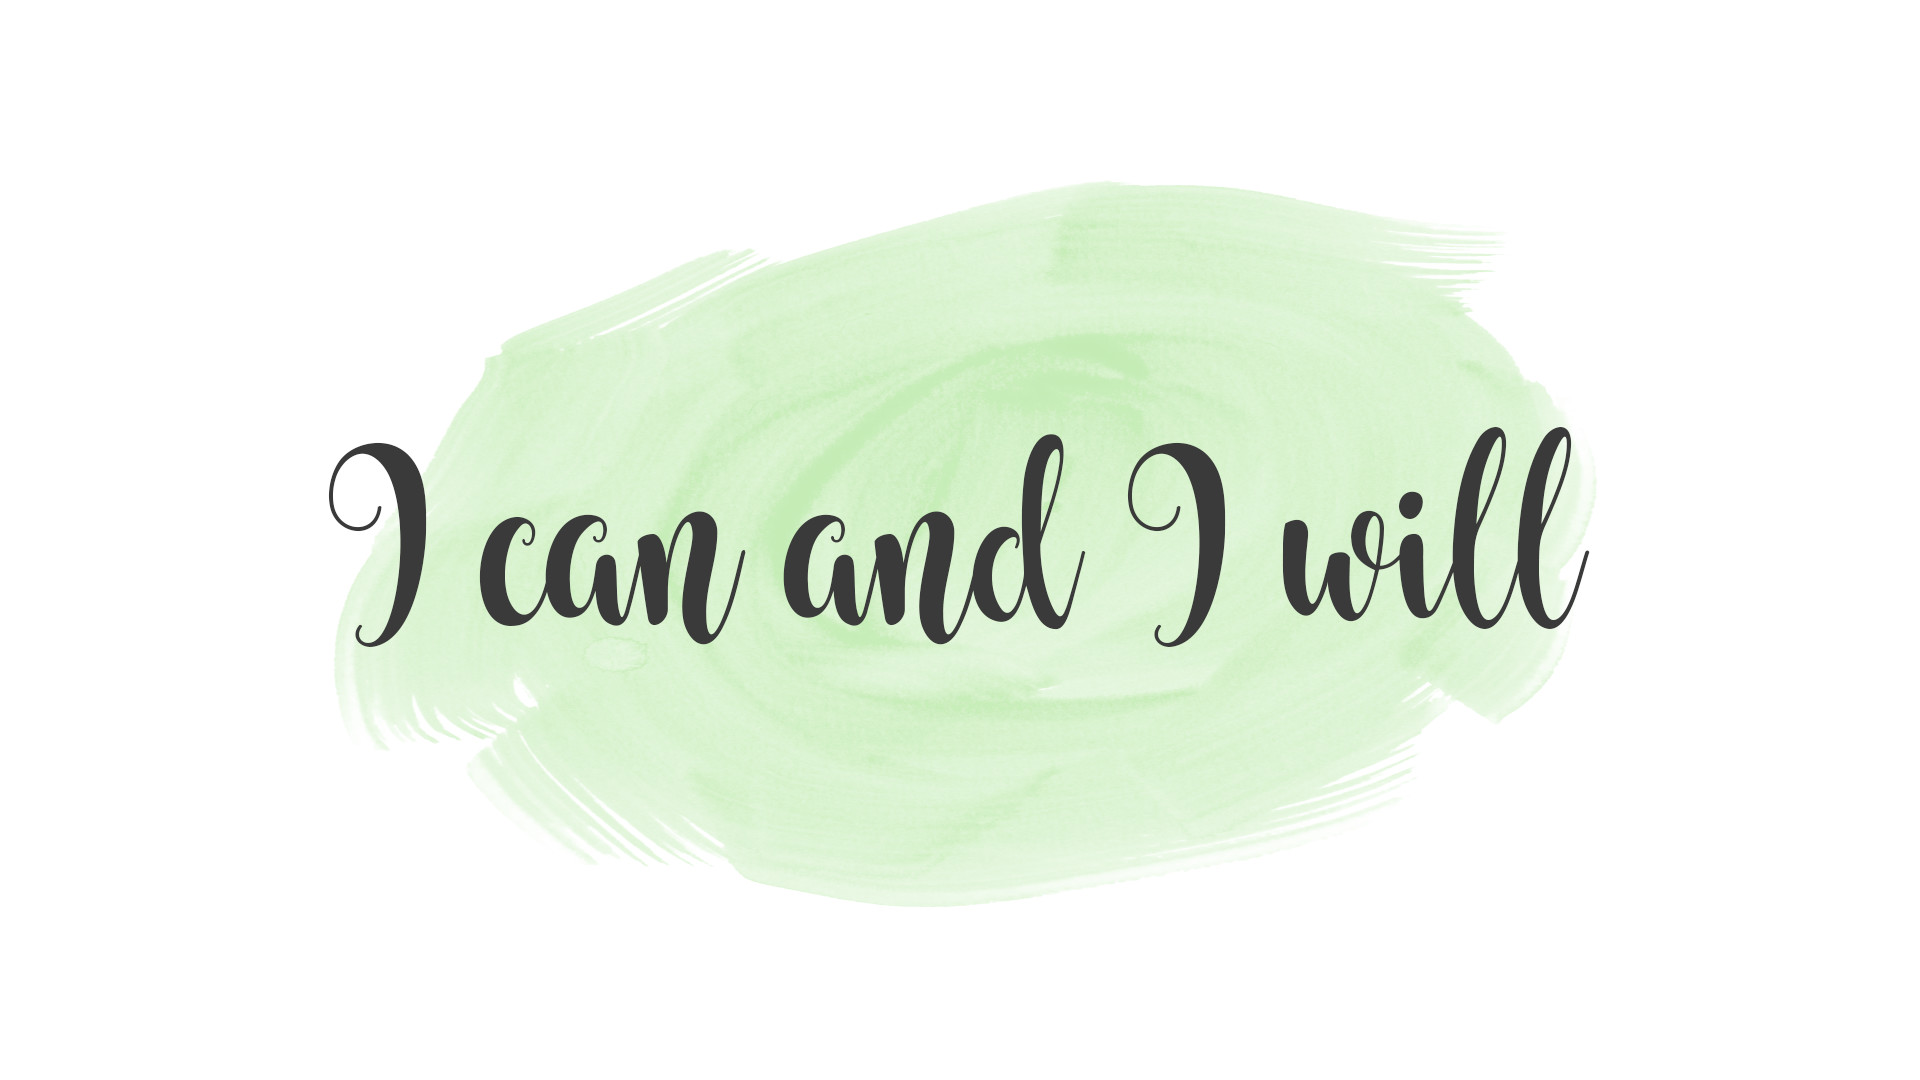 1920x1080 I can and I will | motivational quote for desktop background wallpaper.  find more to